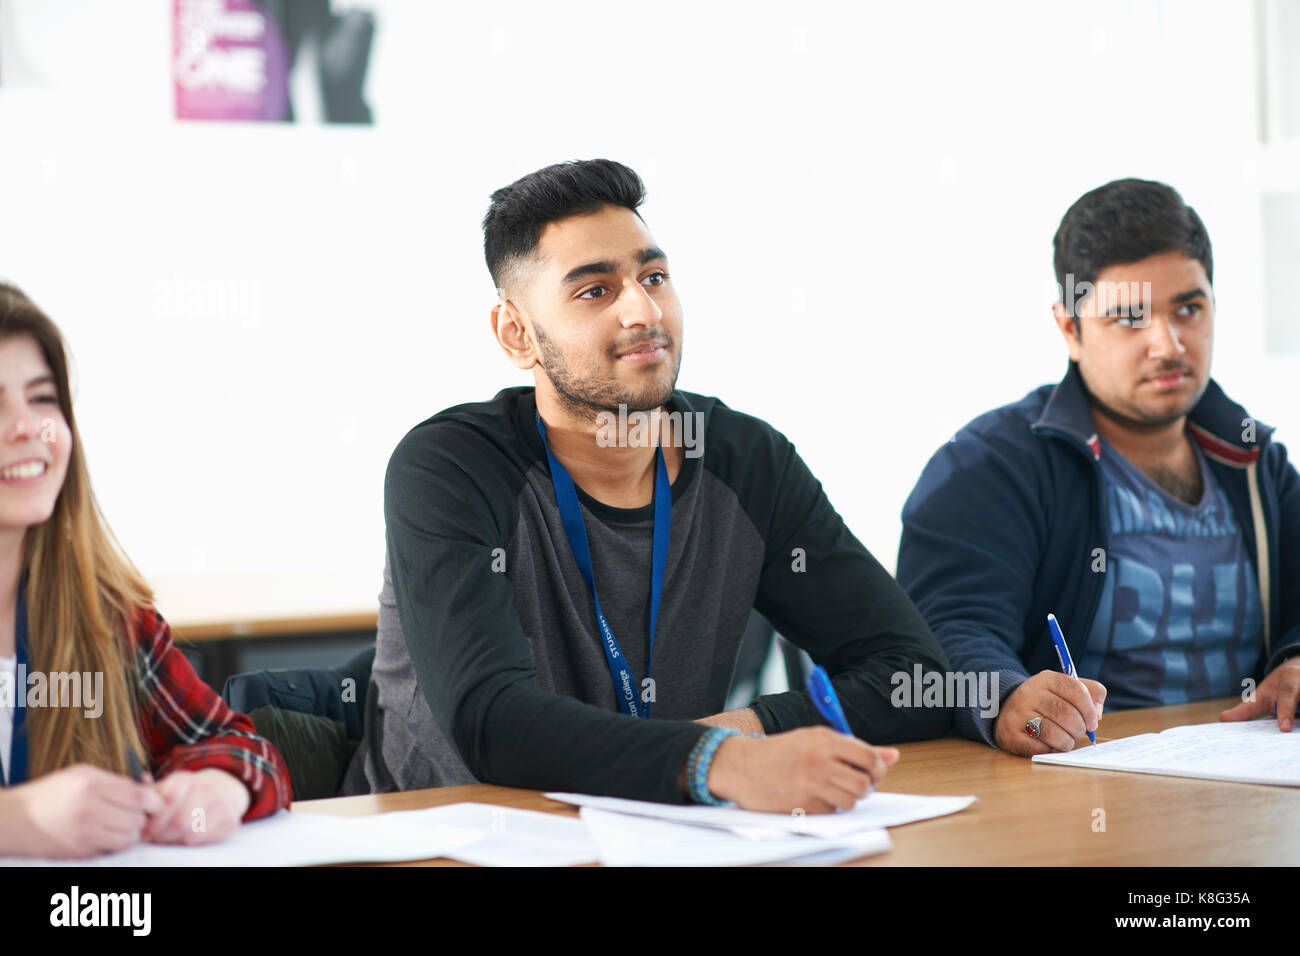 Students studying in classroom Stock Photo